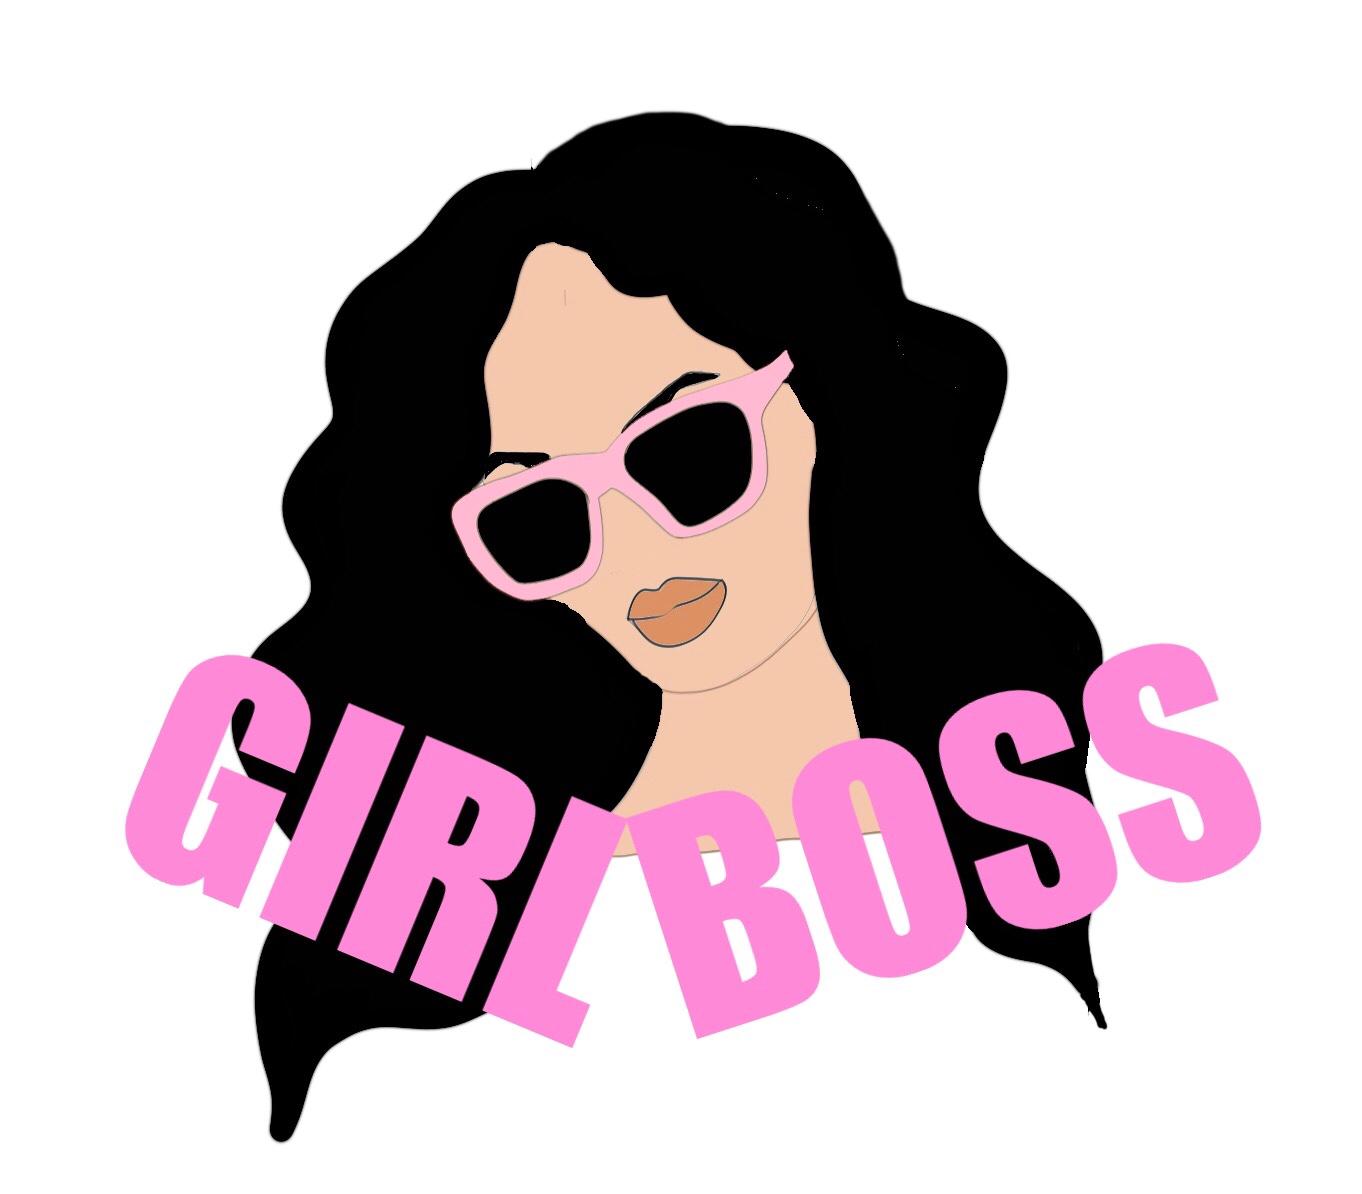 From sidle hustle of slashie: Yes Gurl illustration of a girl boss